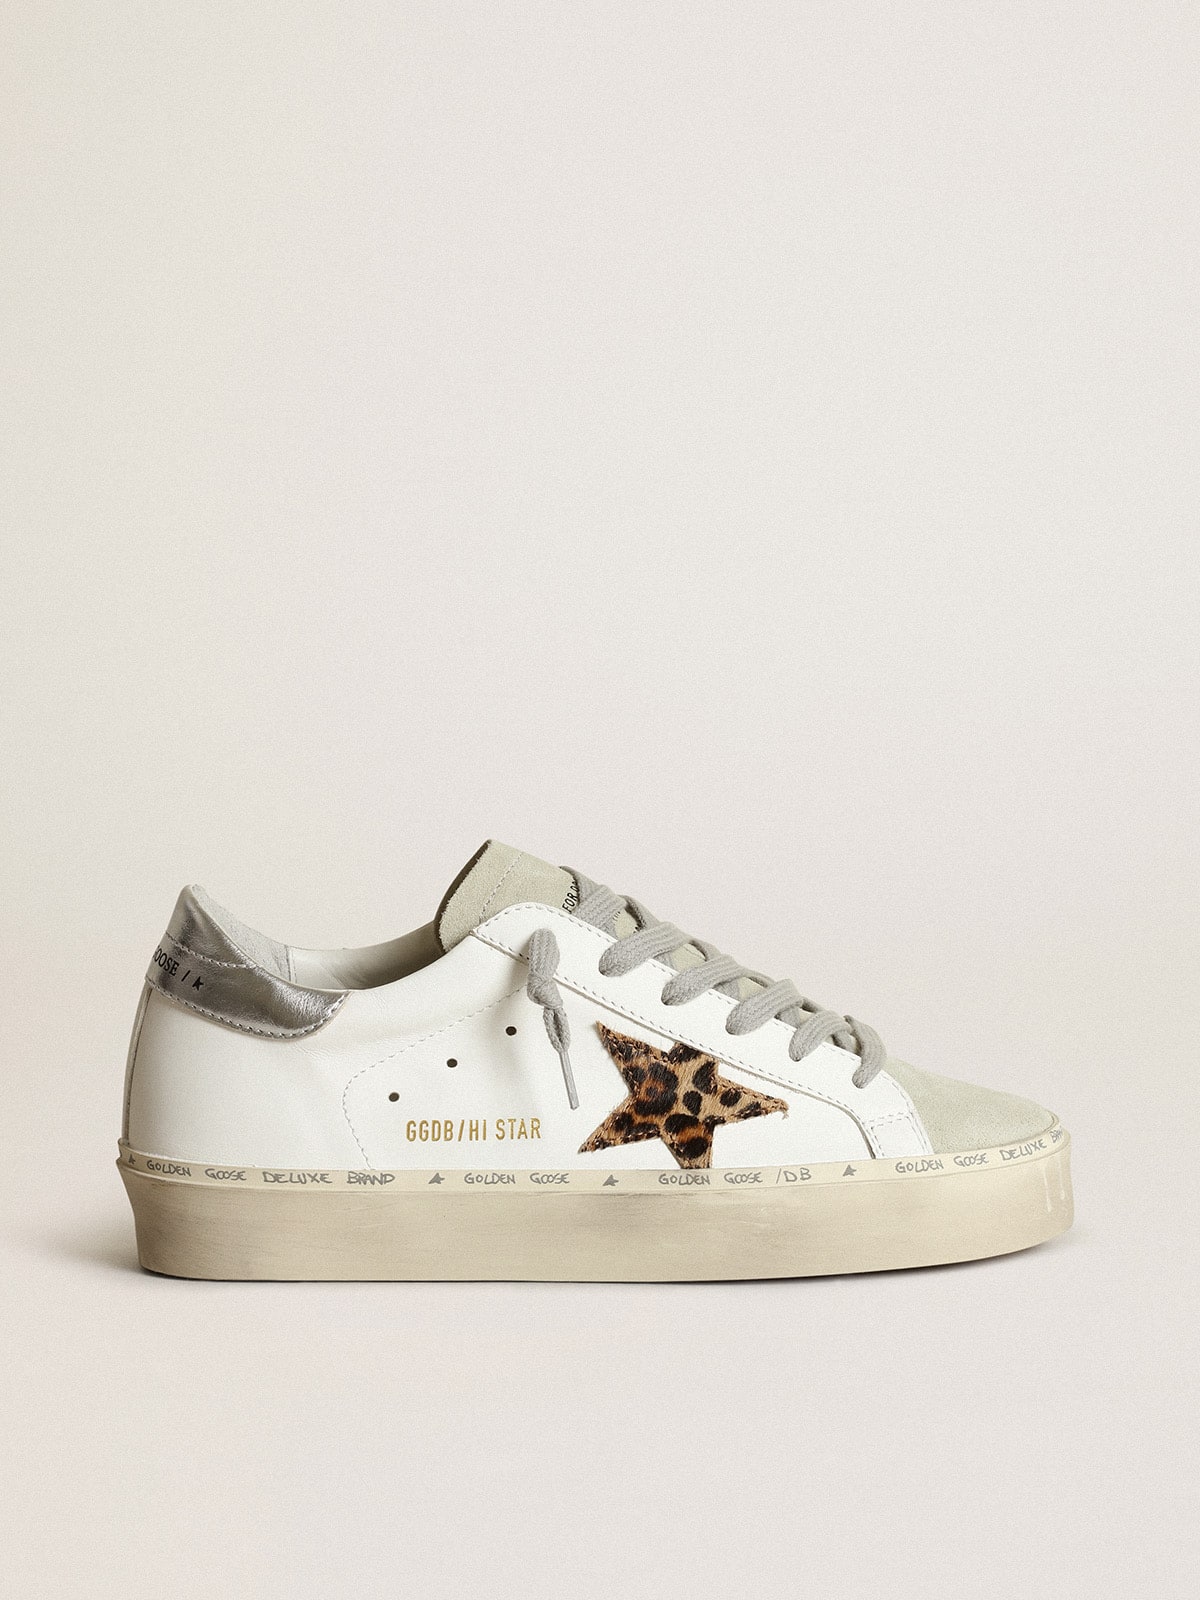 Women's Hi Star with star in leopard print pony skin and silver heel